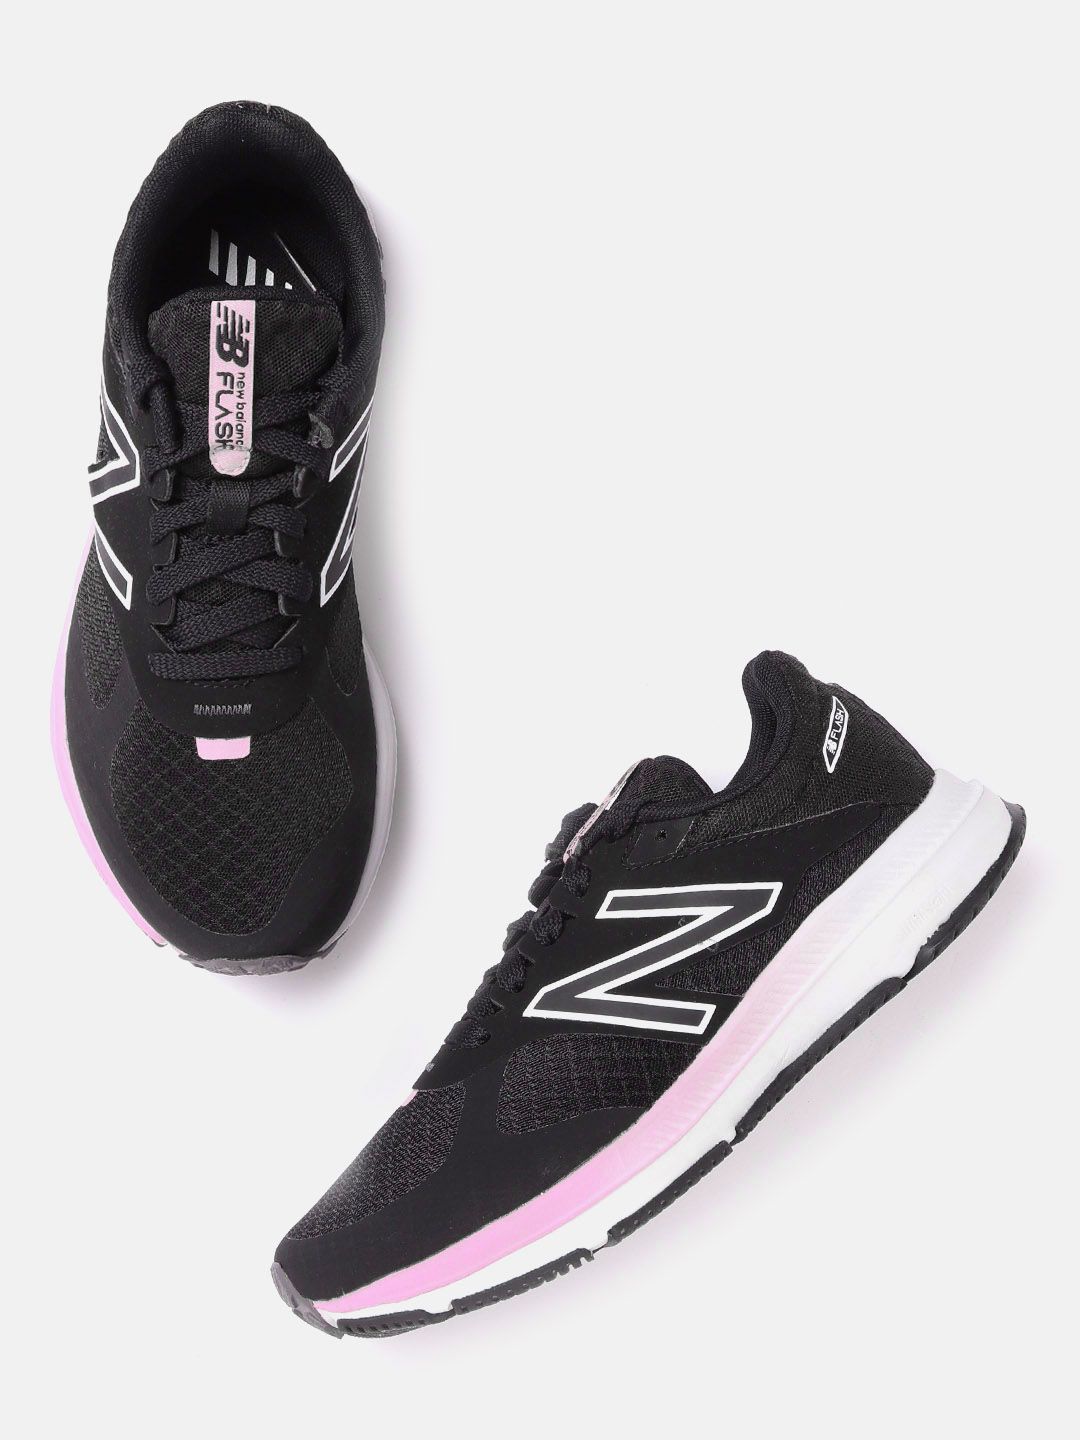 New Balance Women Black Flash Woven Design Running Shoes Price in India